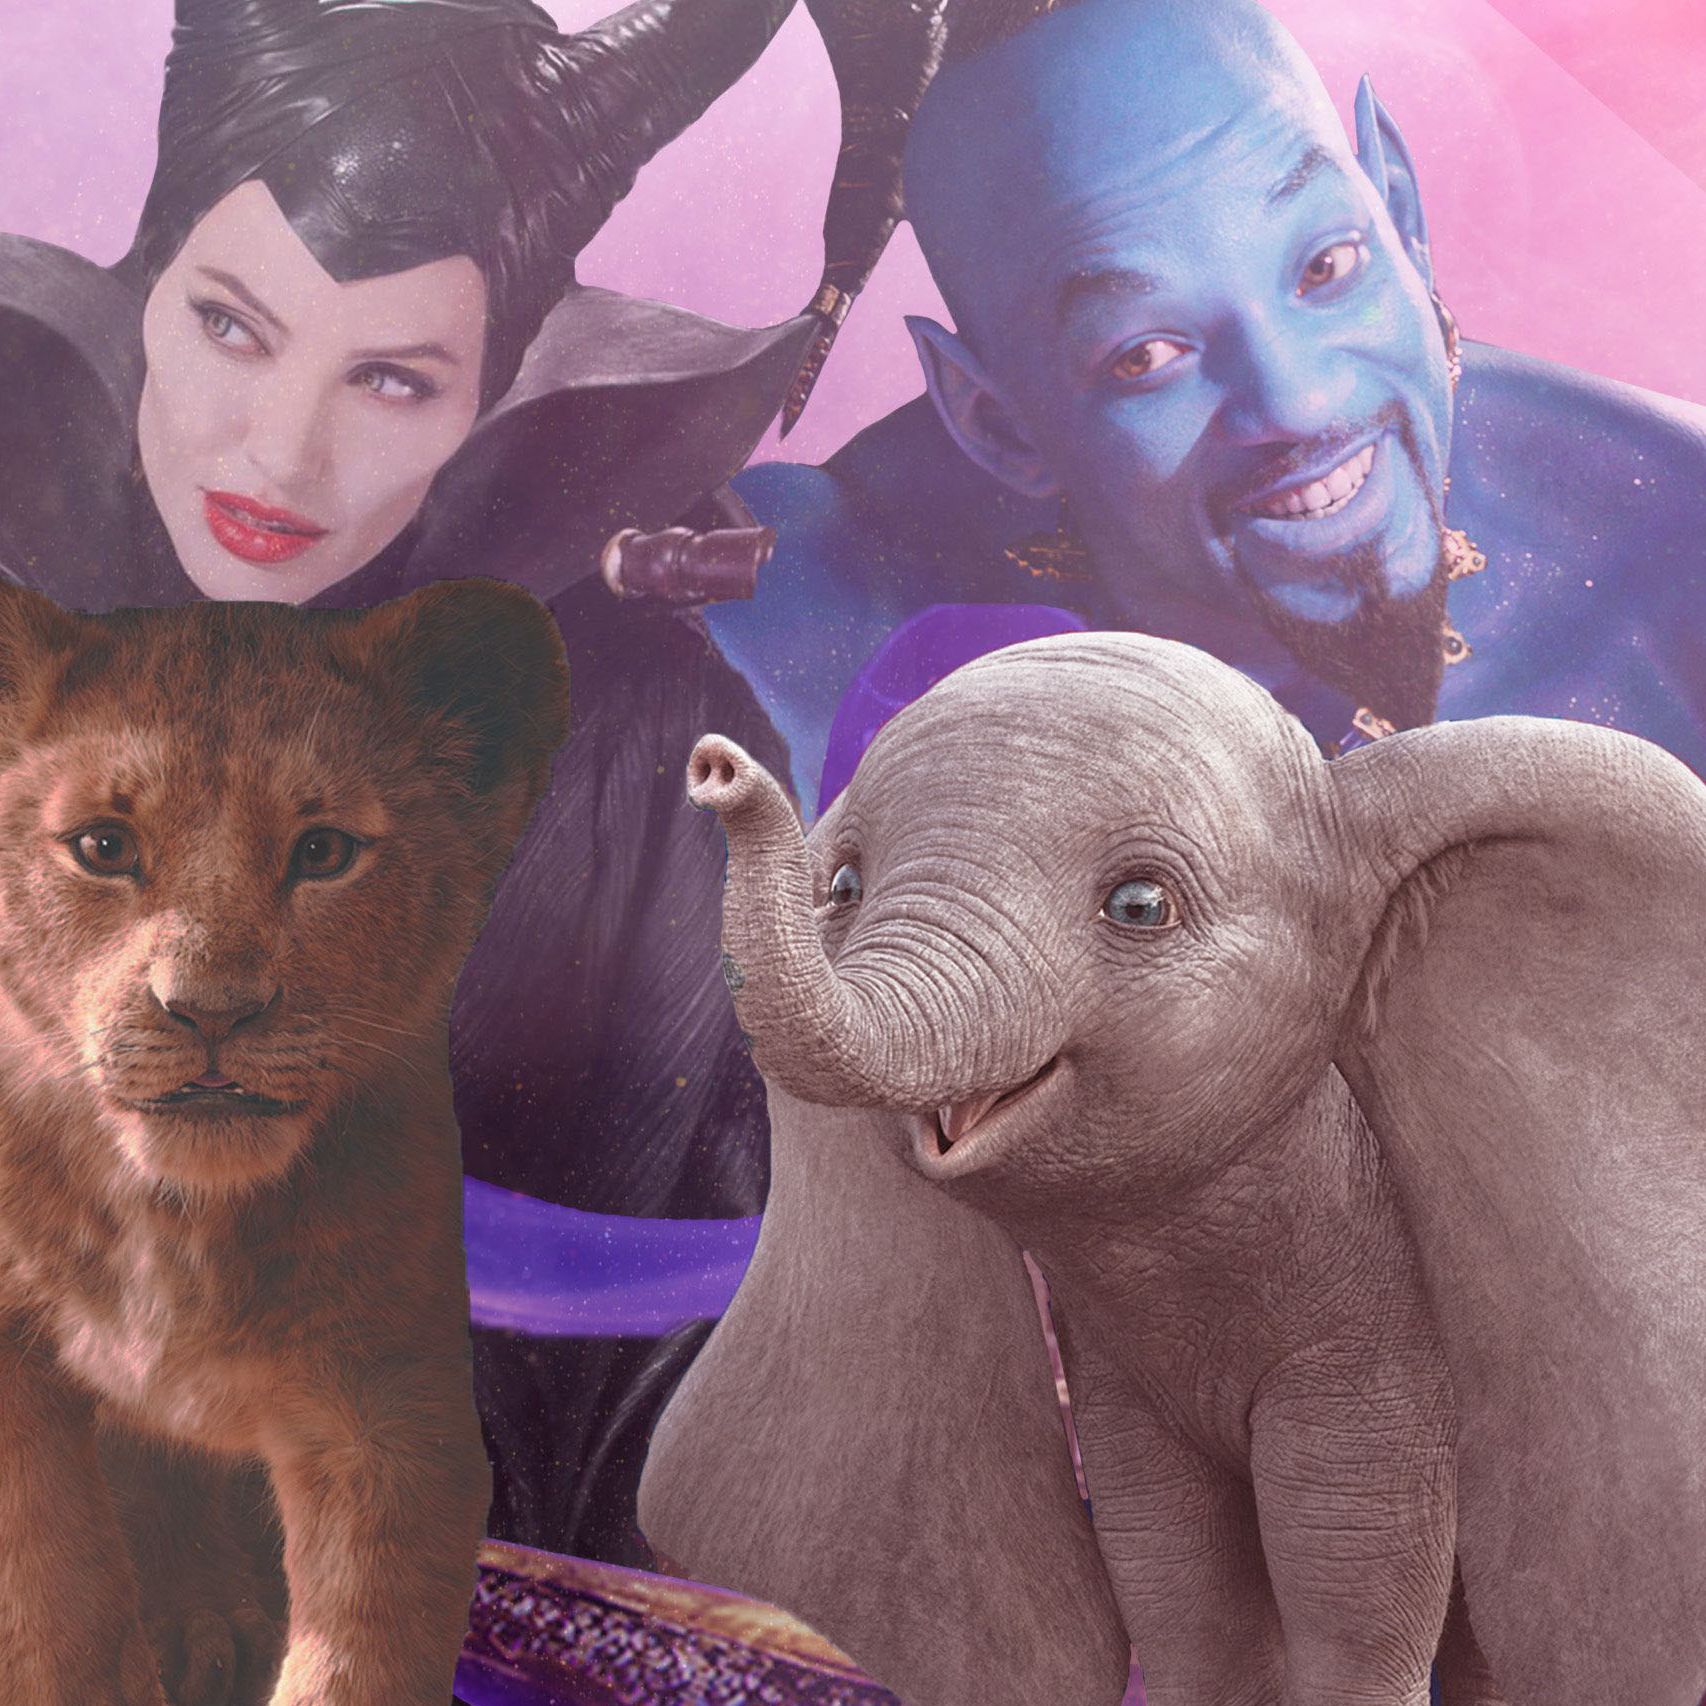 Disney remakes - Why Disney is making live-action remakes of